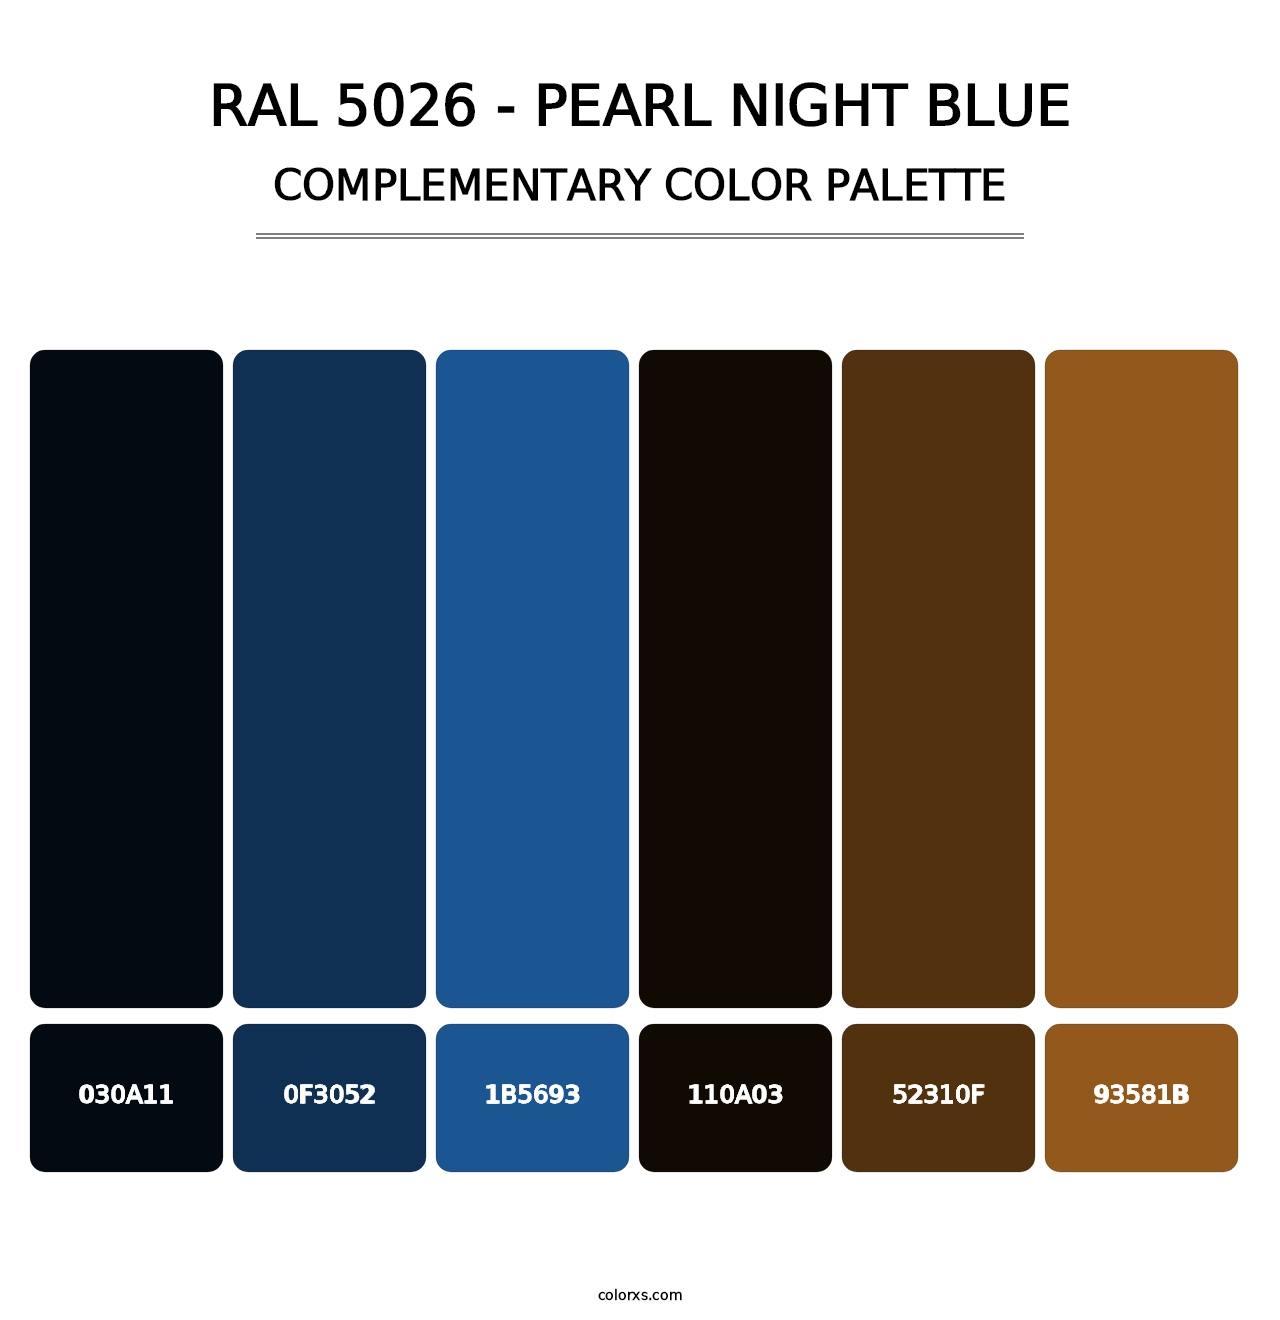 RAL 5026 - Pearl Night Blue - Complementary Color Palette